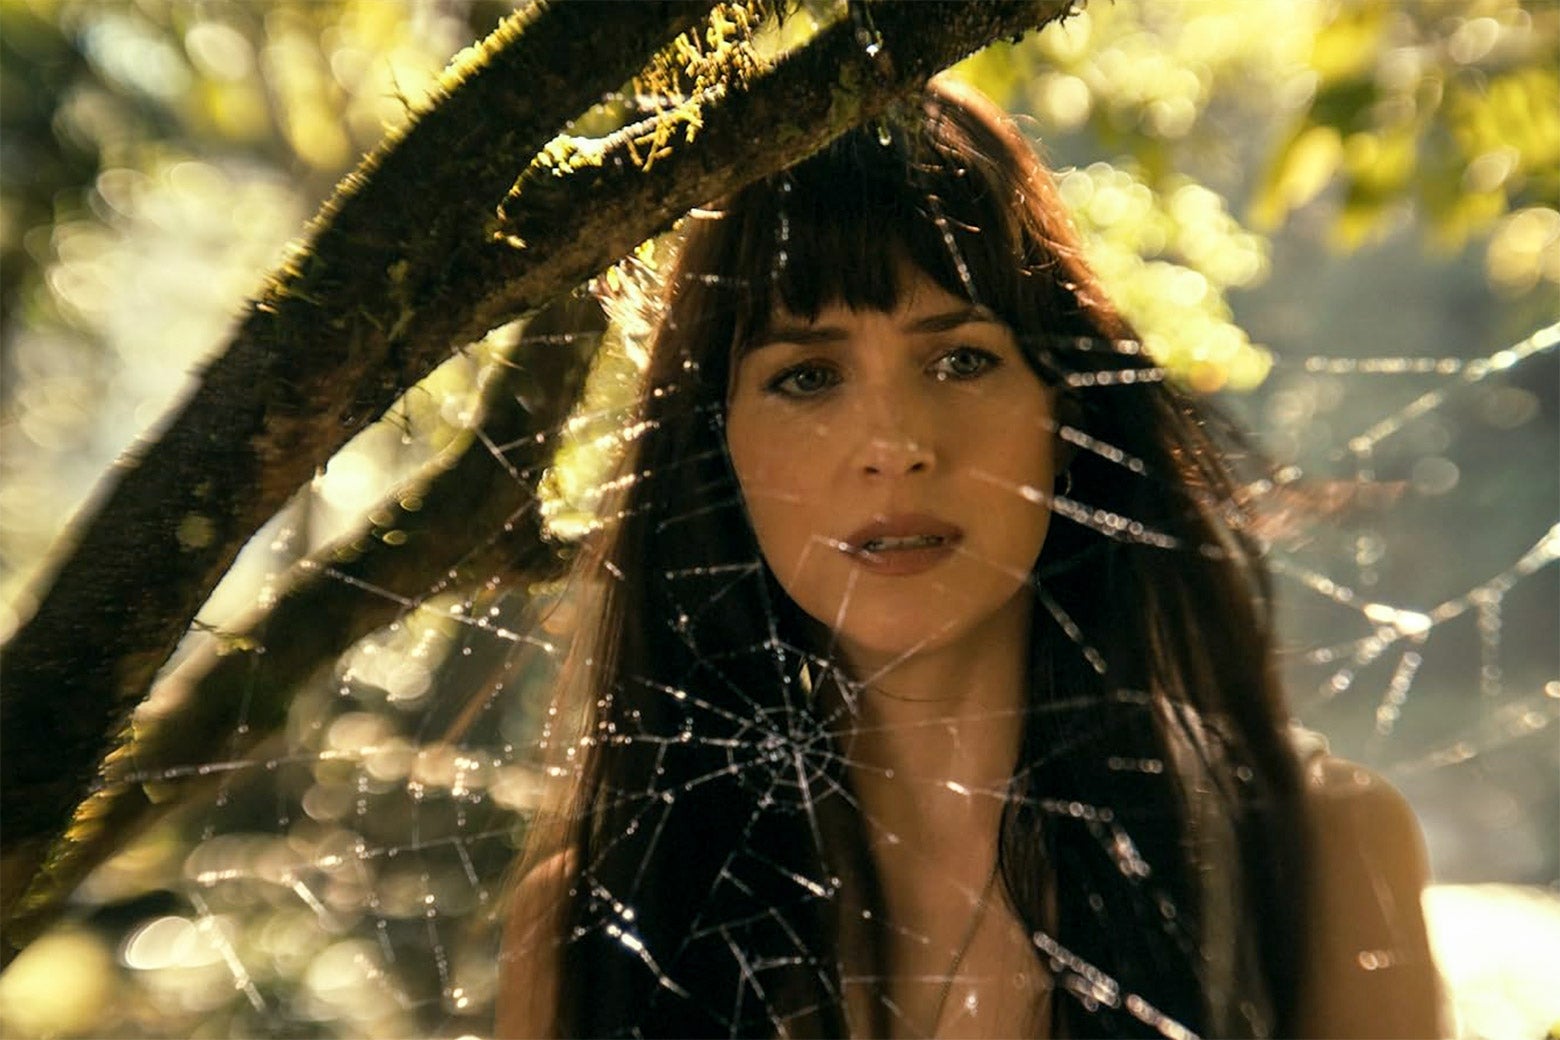 Dakota Johnson stares at a spiderweb, looking confused